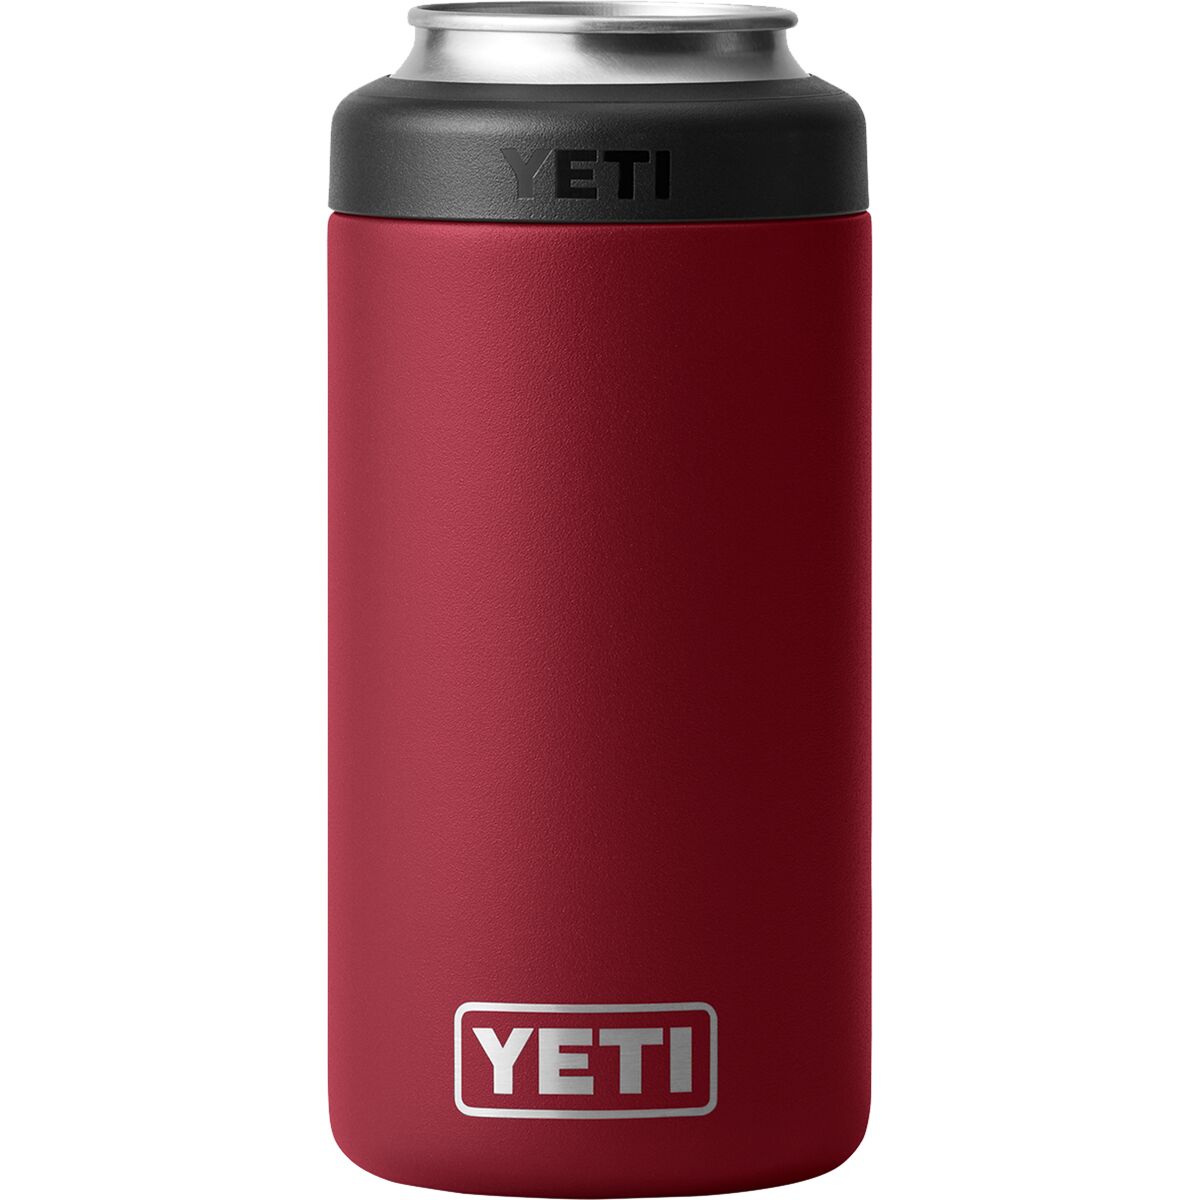  YETI Rambler 12 oz. Colster Can Insulator for Standard Size  Cans, Canopy Green (NO CAN INSERT): Home & Kitchen